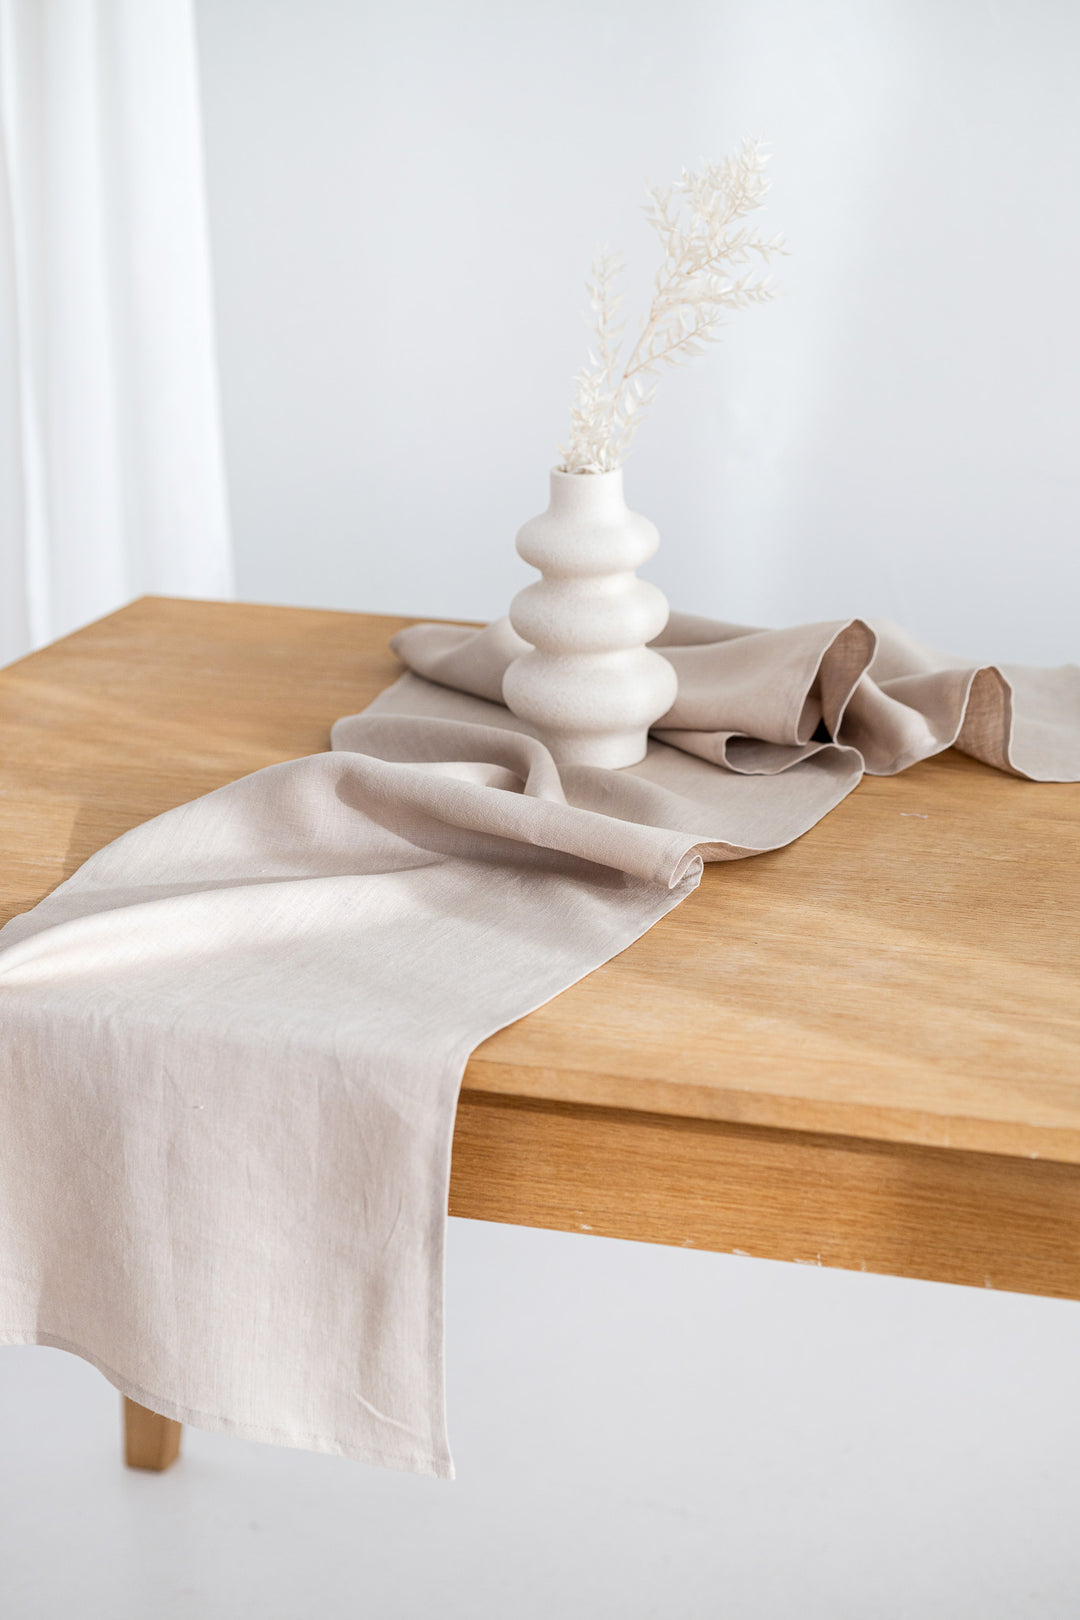 Linen Table Runner On Table In Natural Color 1 - Daily Linen